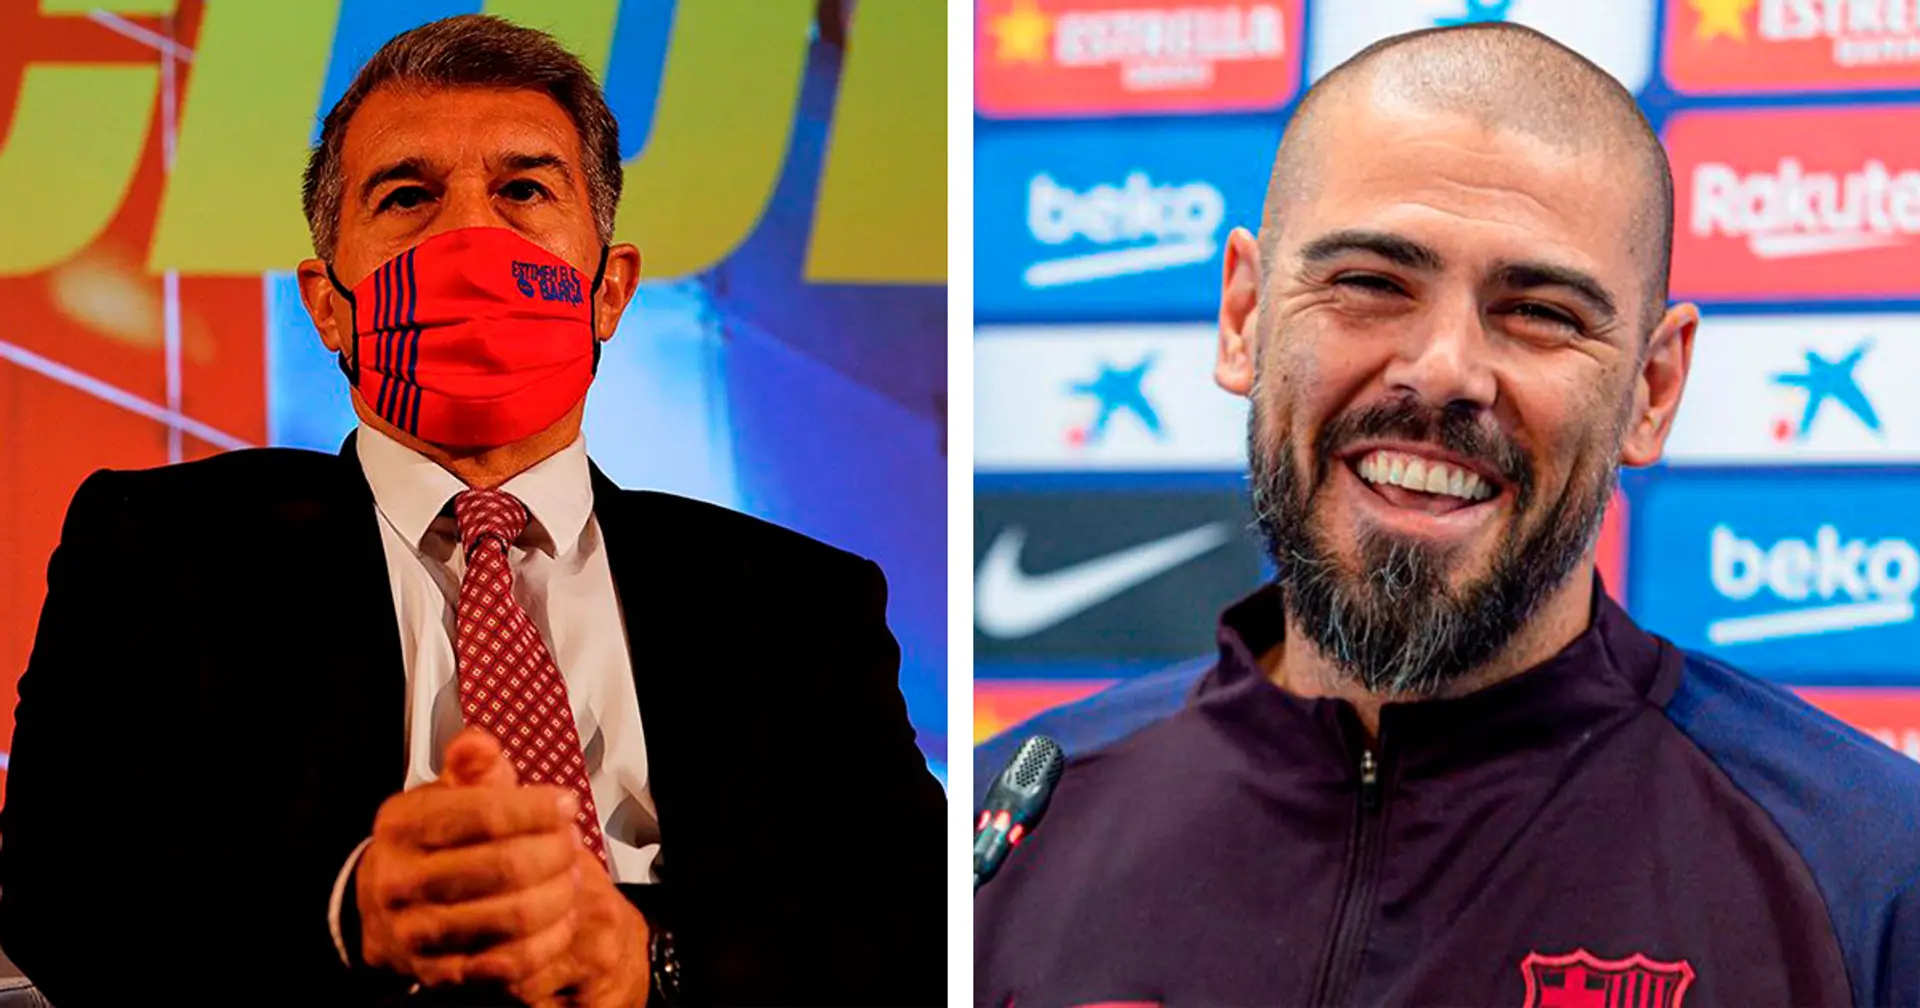 Victor Valdes leaves Horta 'to focus on Joan Laporta's presidential project'